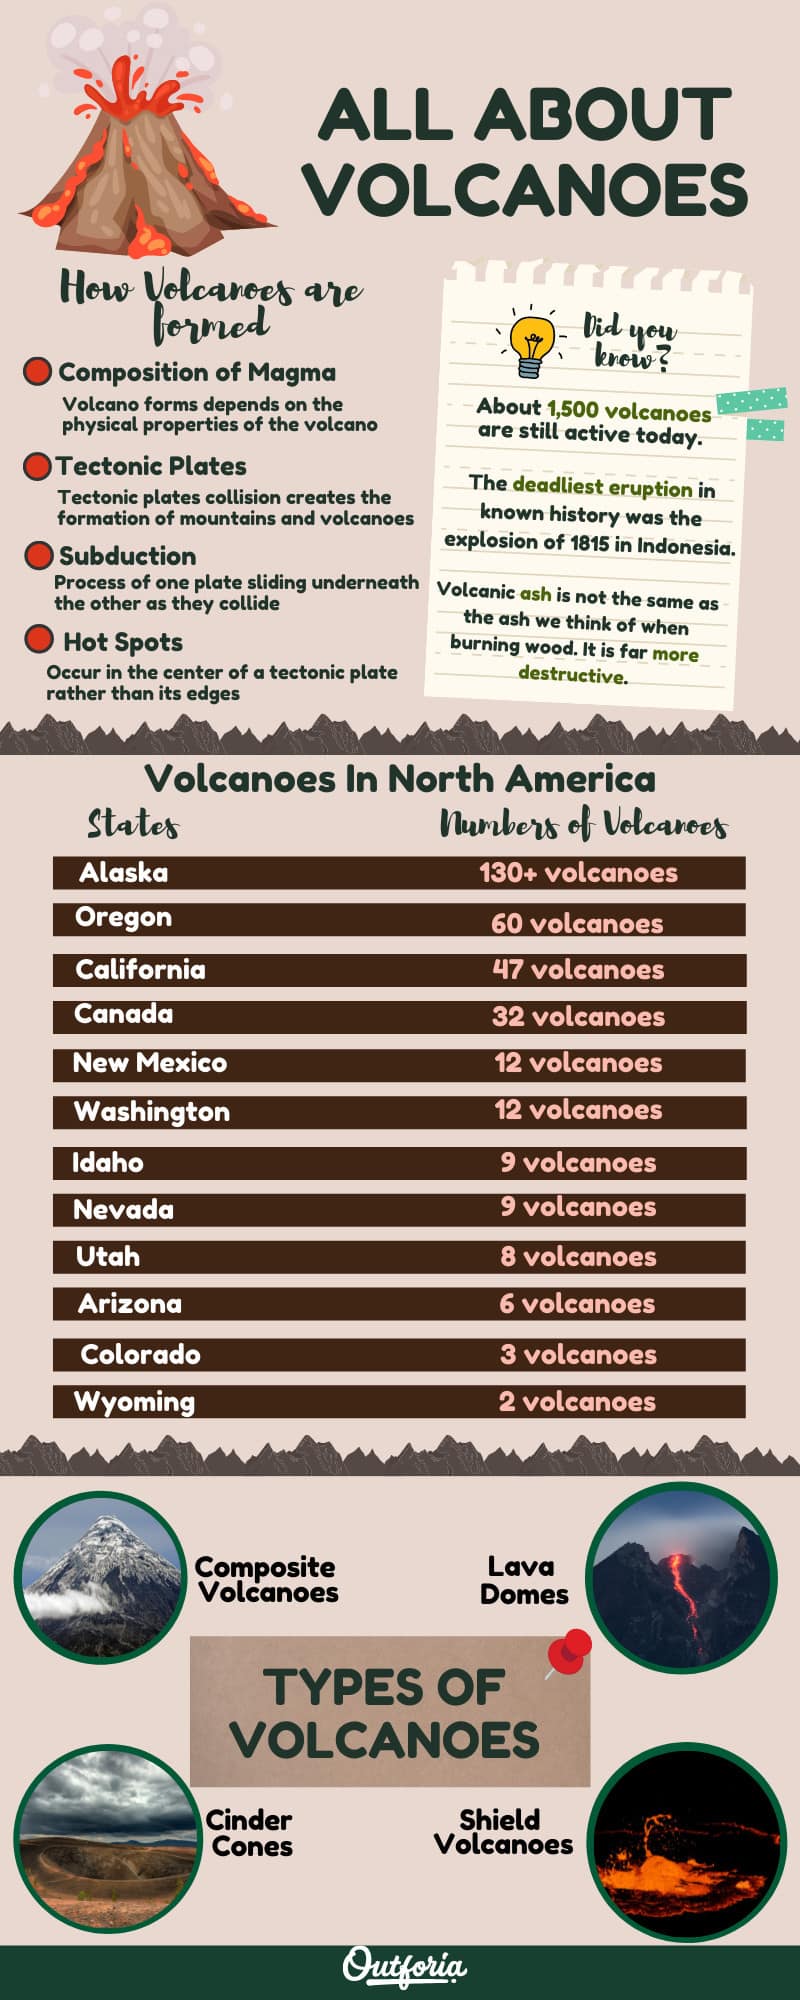 the 4  types of volcanoes infographic with facts and numbers of volcanoes per state